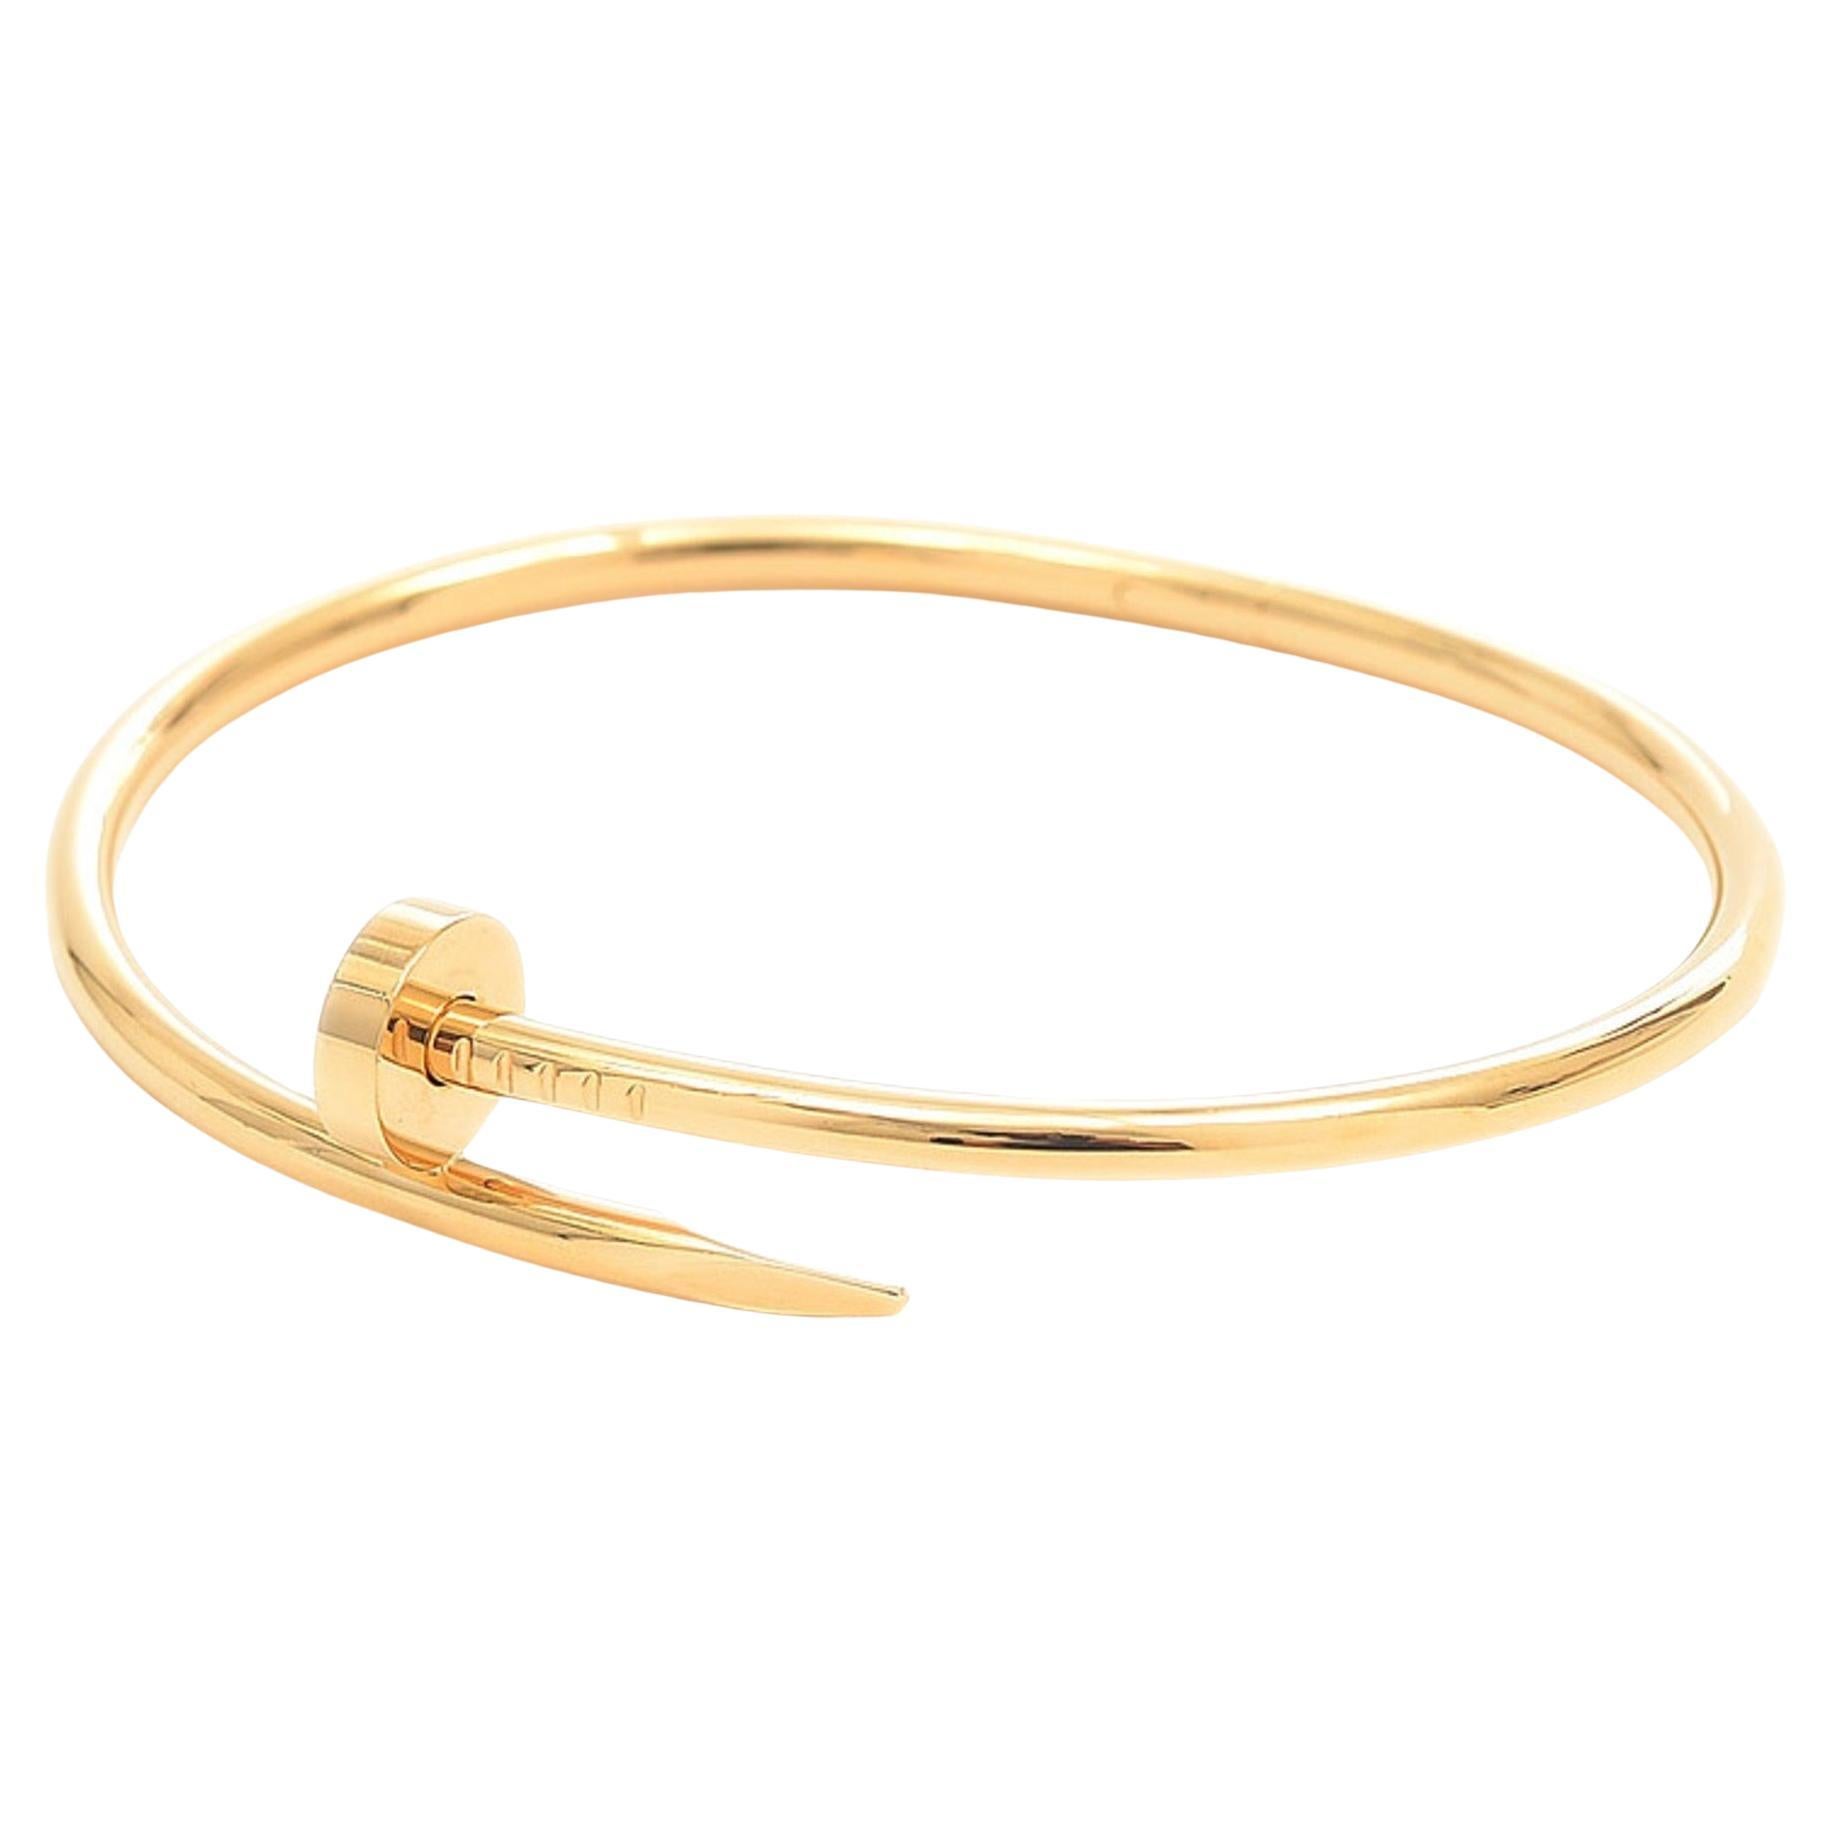 Cartier Just Uncle Bracelet Bangle in 18K Yellow Gold